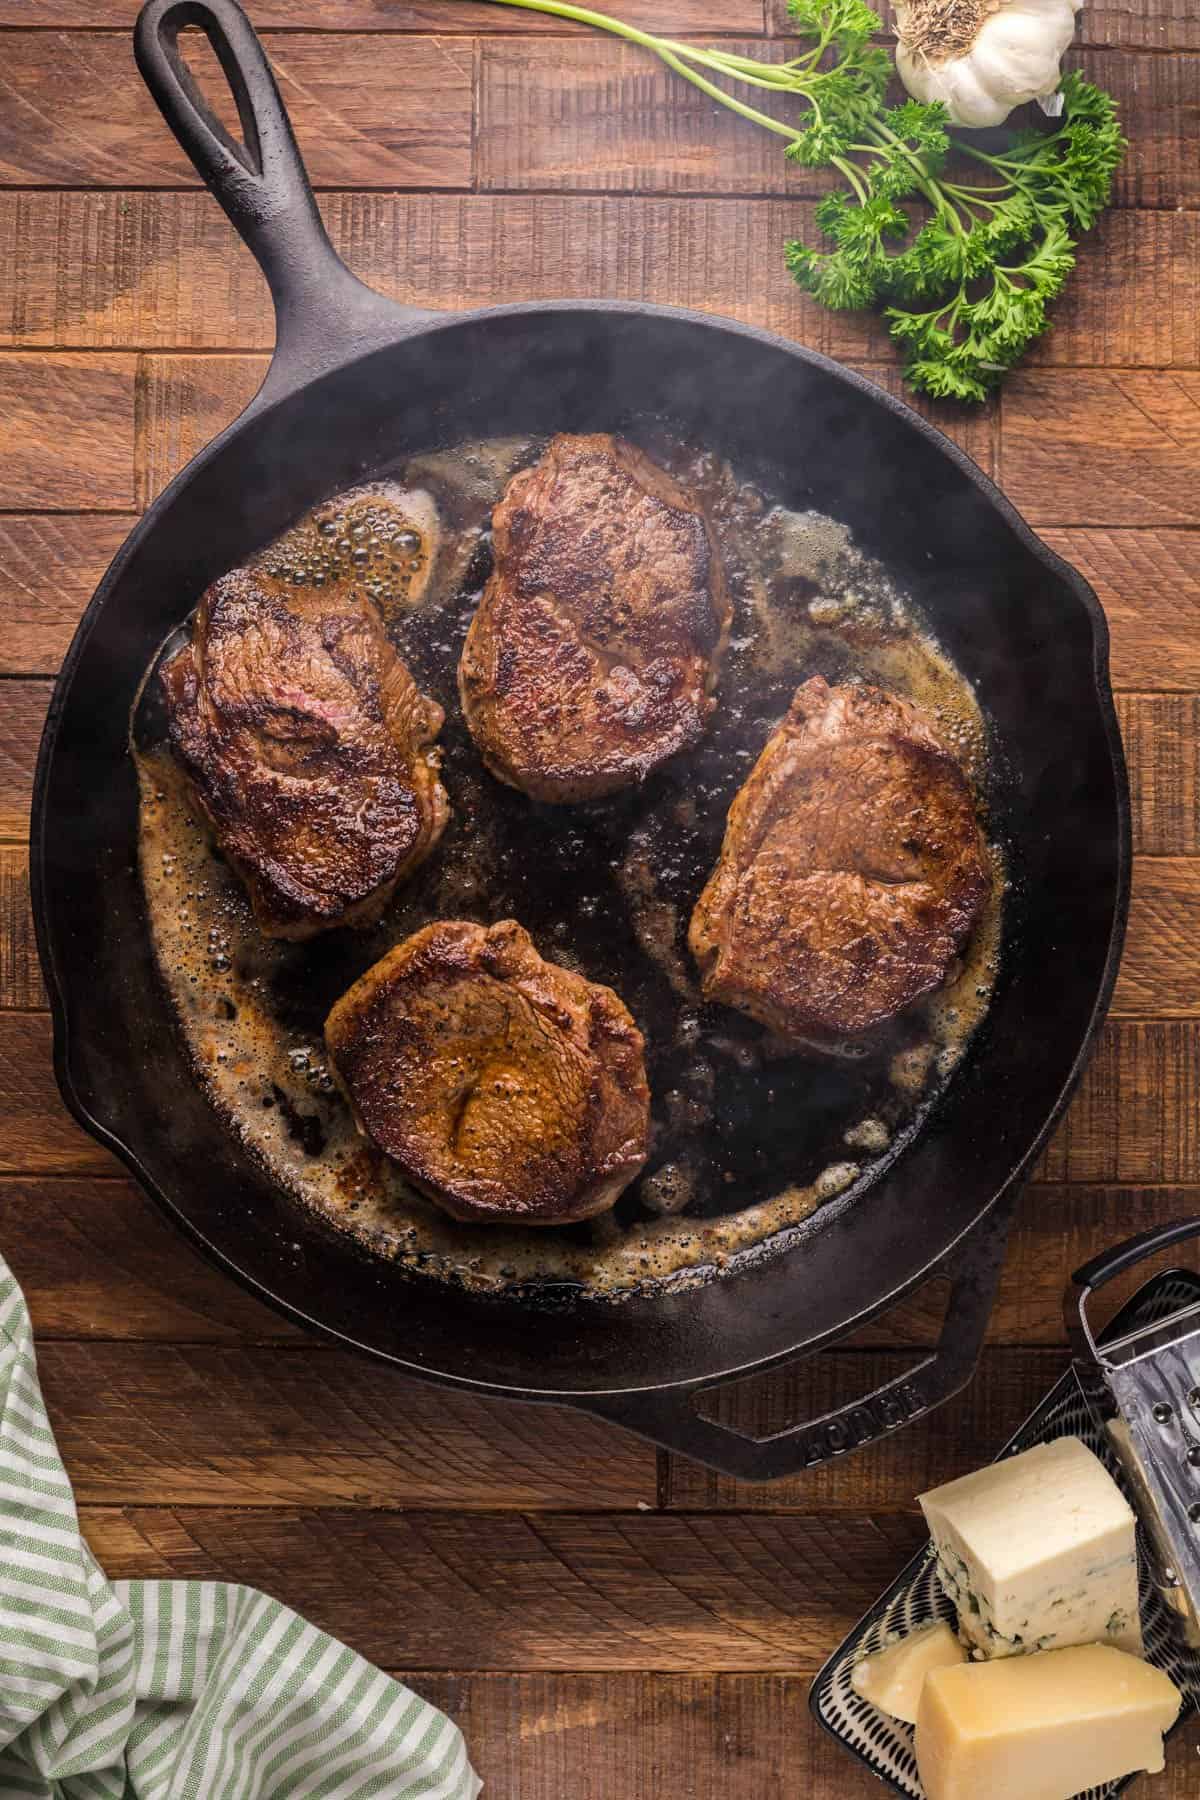 Searing steak in a cast iron skillet.